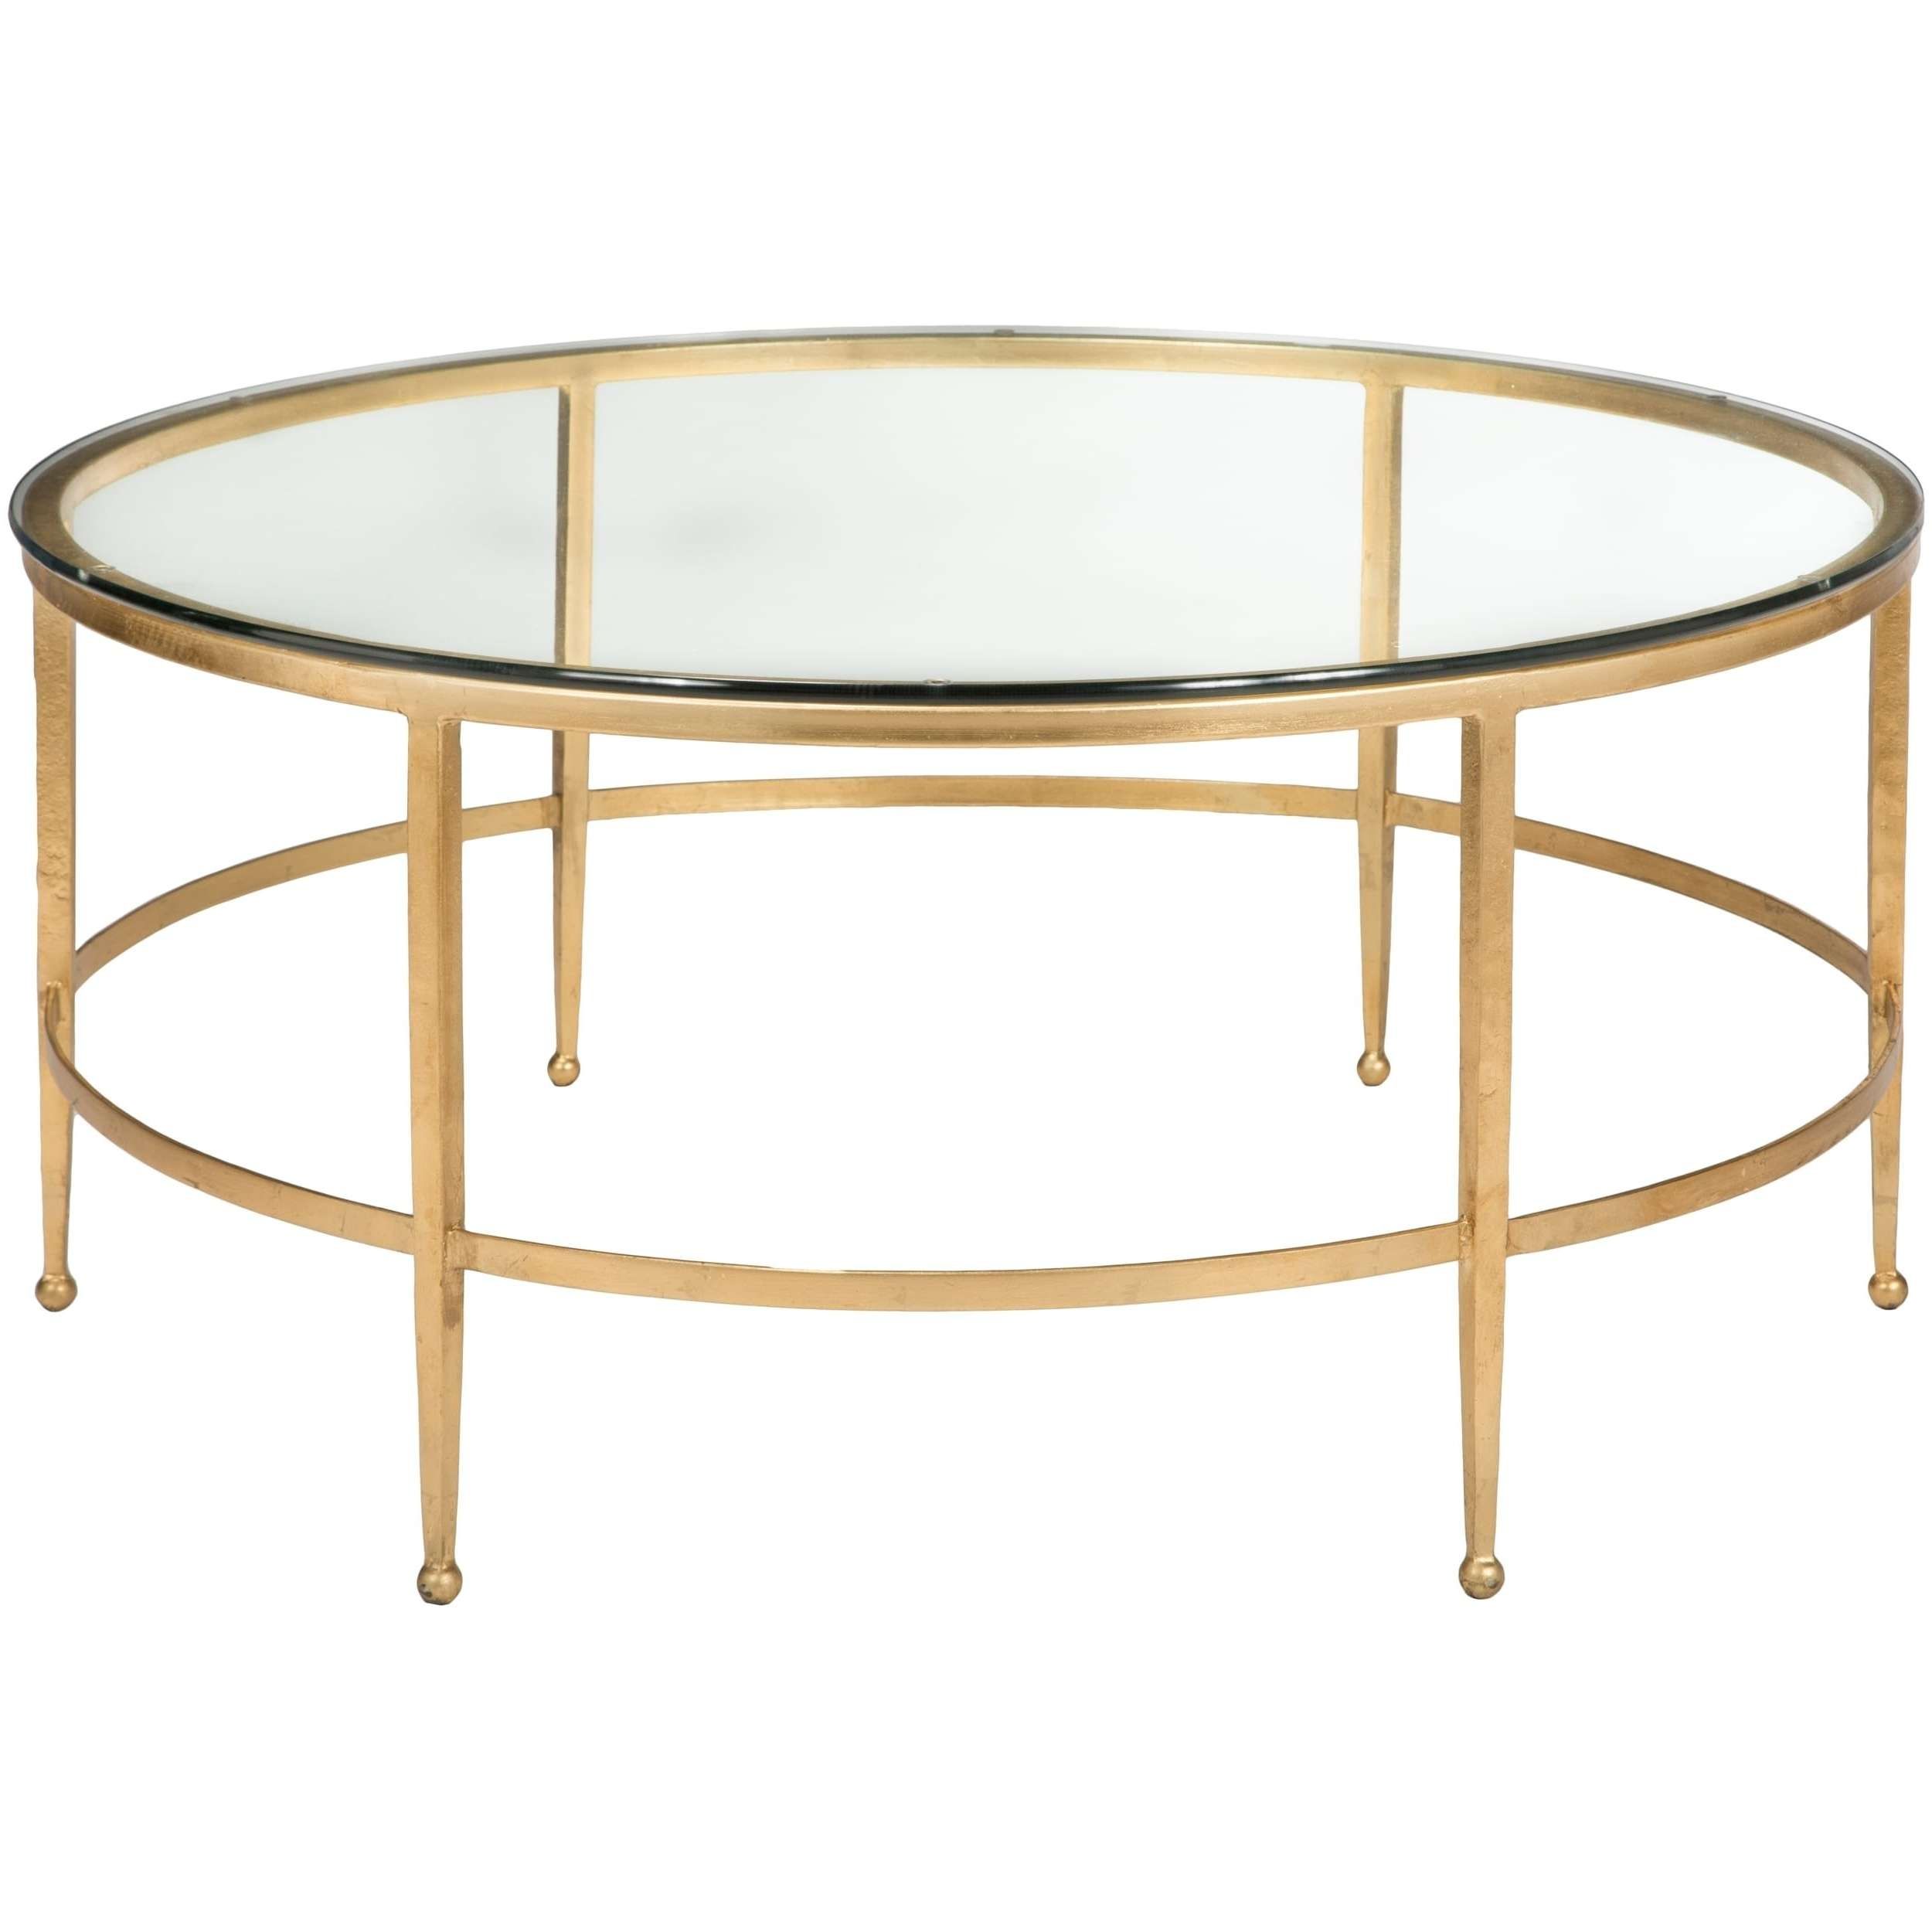 Widely Used Gold Round Coffee Table With Safavieh Couture High Line Collection Edmund Antique Gold Gilt (View 3 of 20)